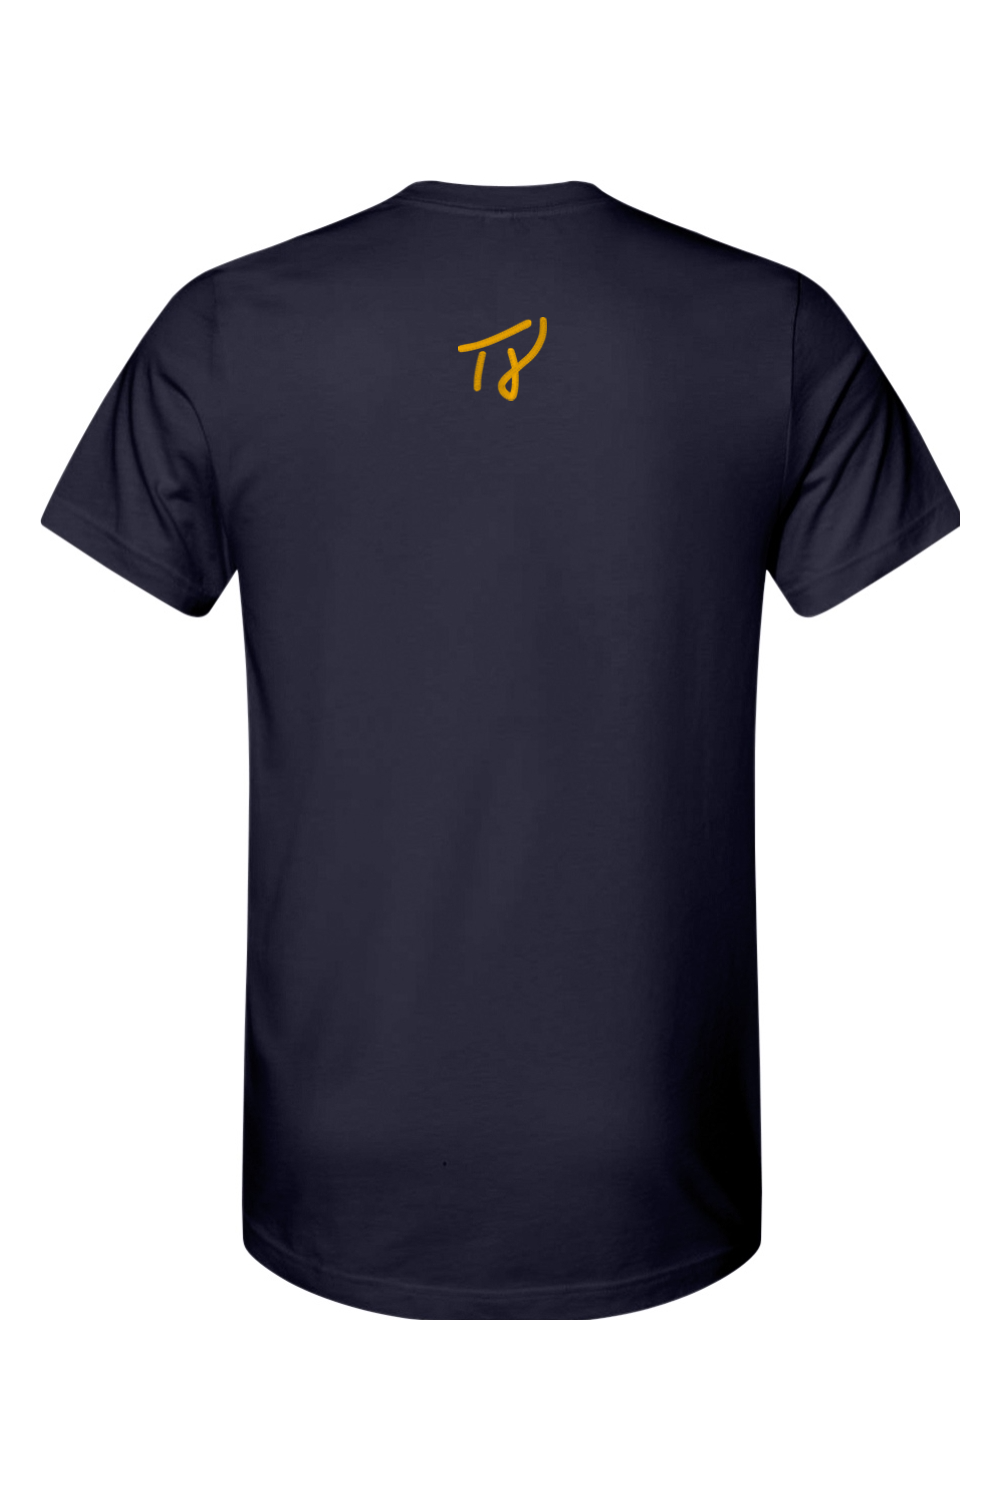 TJ53 real Jersey Tee